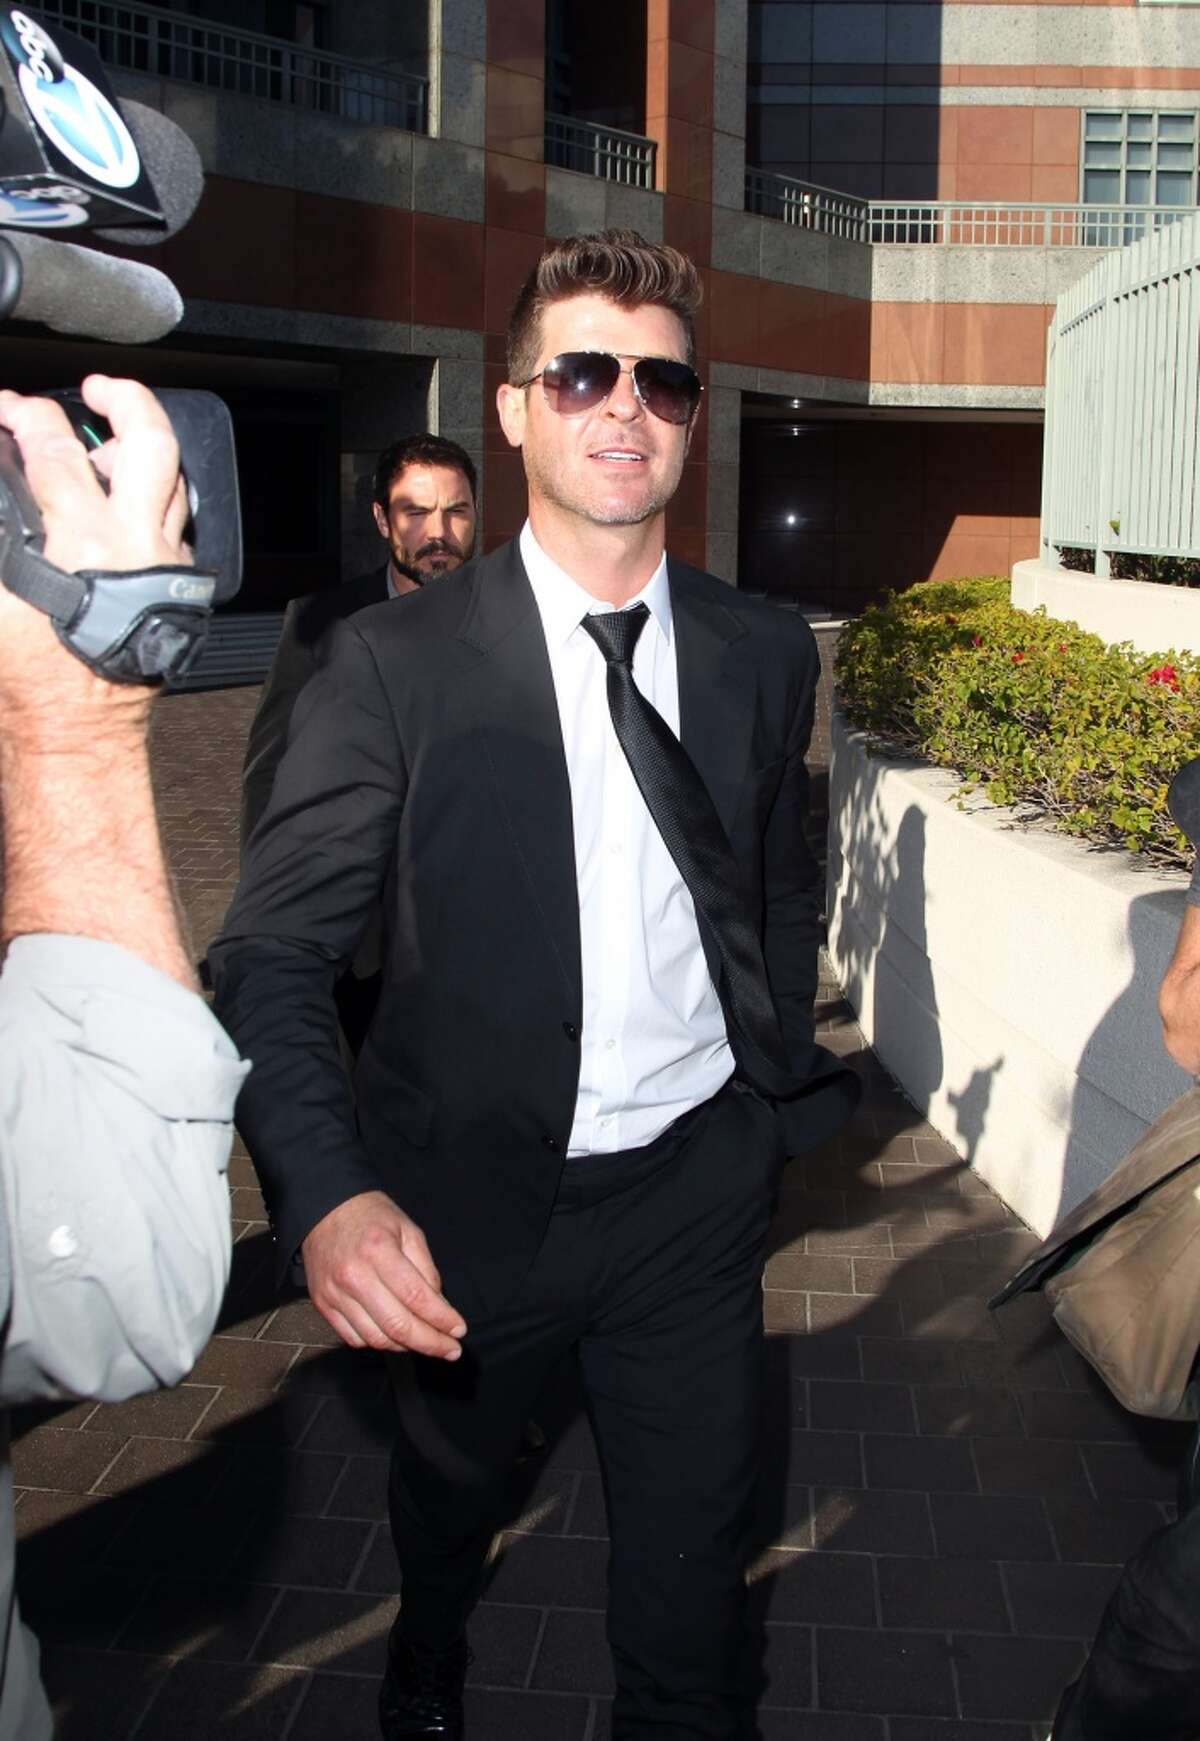 Musician Robin Thicke is seen outside the Roybal Federal Building on March 5, 2015 in Los Angeles, California. Thicke and co-writers of the song "Blurred Lines" are being sued by the children of singer Marvin Gaye for using elements of Gaye's song "Got to Give it Up" in "Blurred Lines."